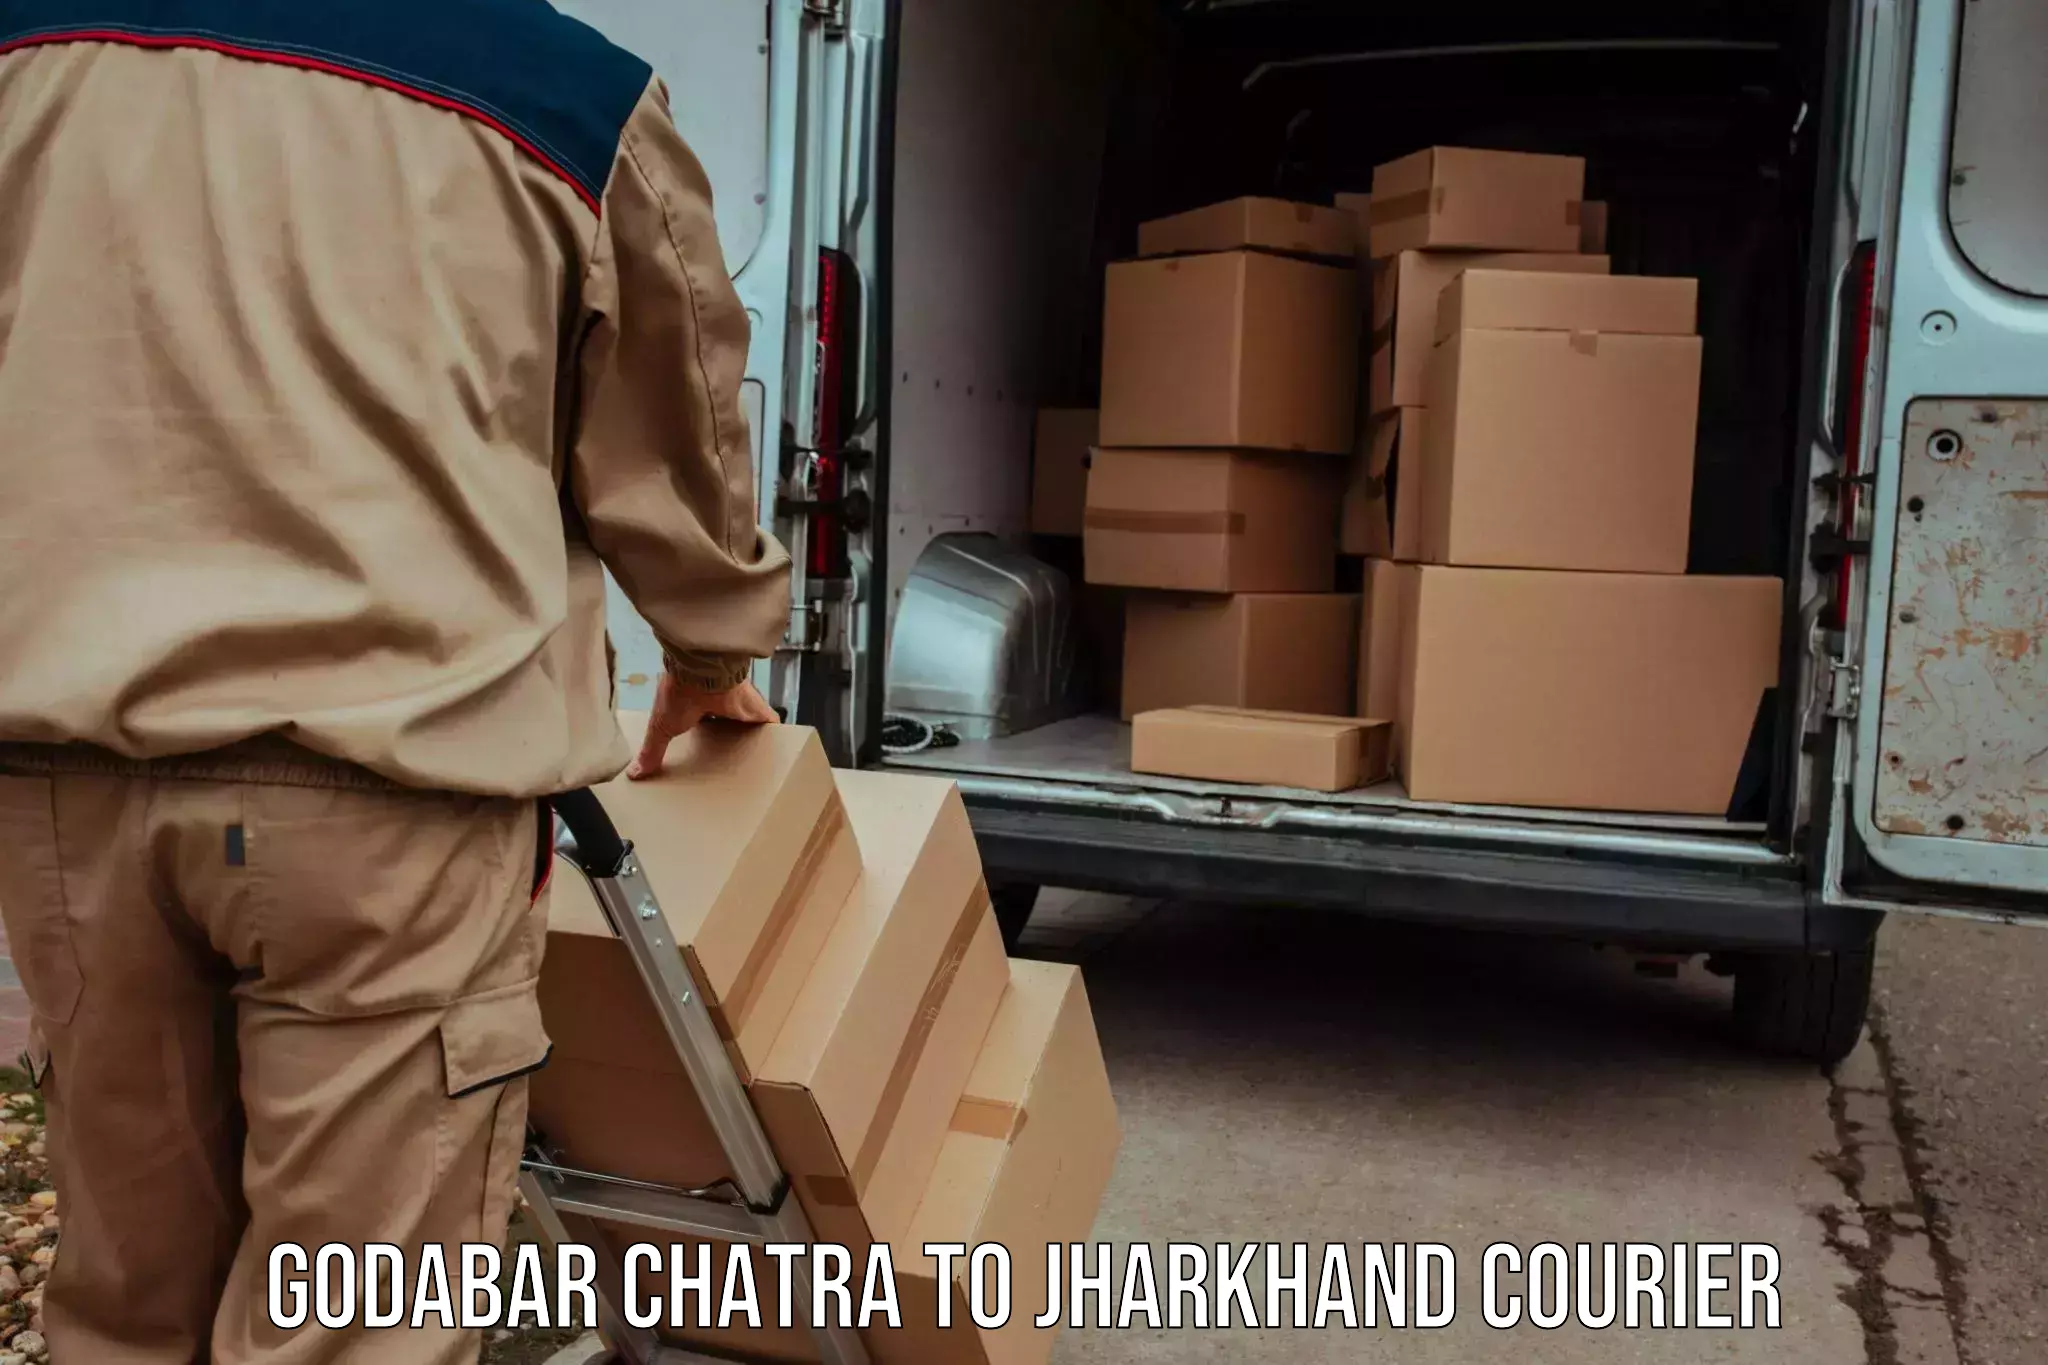 High-priority parcel service Godabar Chatra to Chandwa